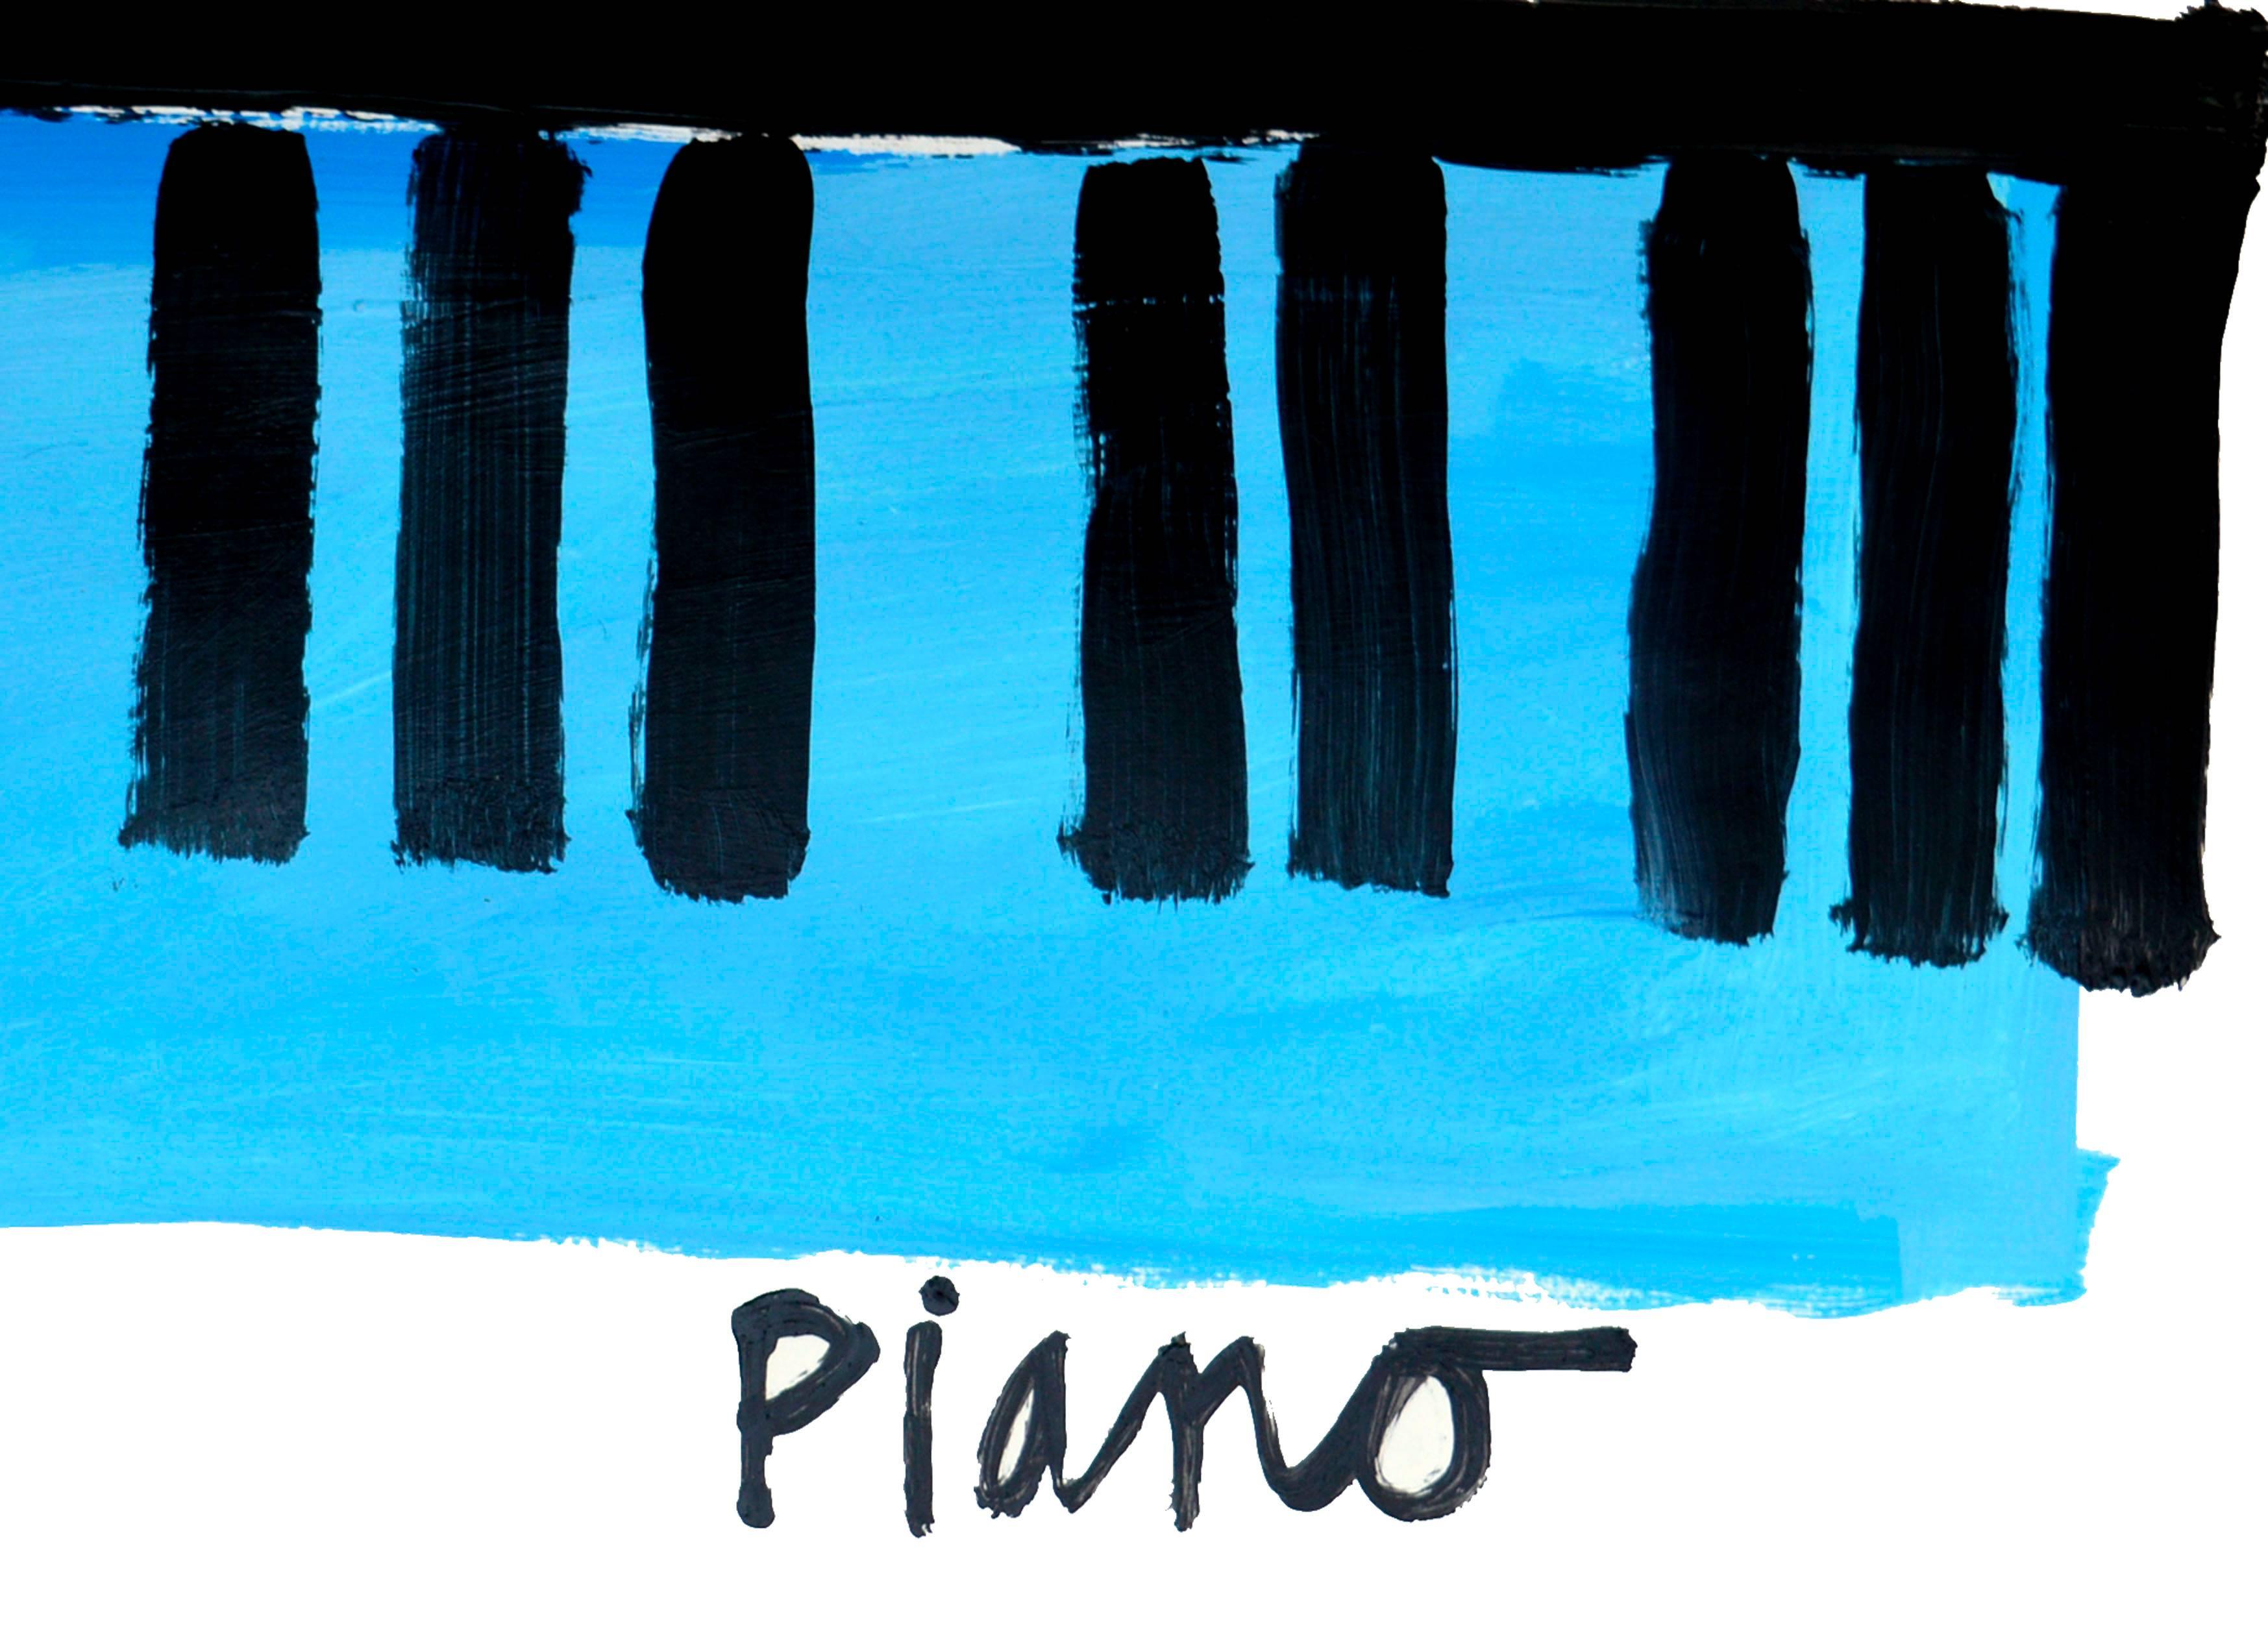 Piano  - Blue Abstract Painting by Michael William Eggleston